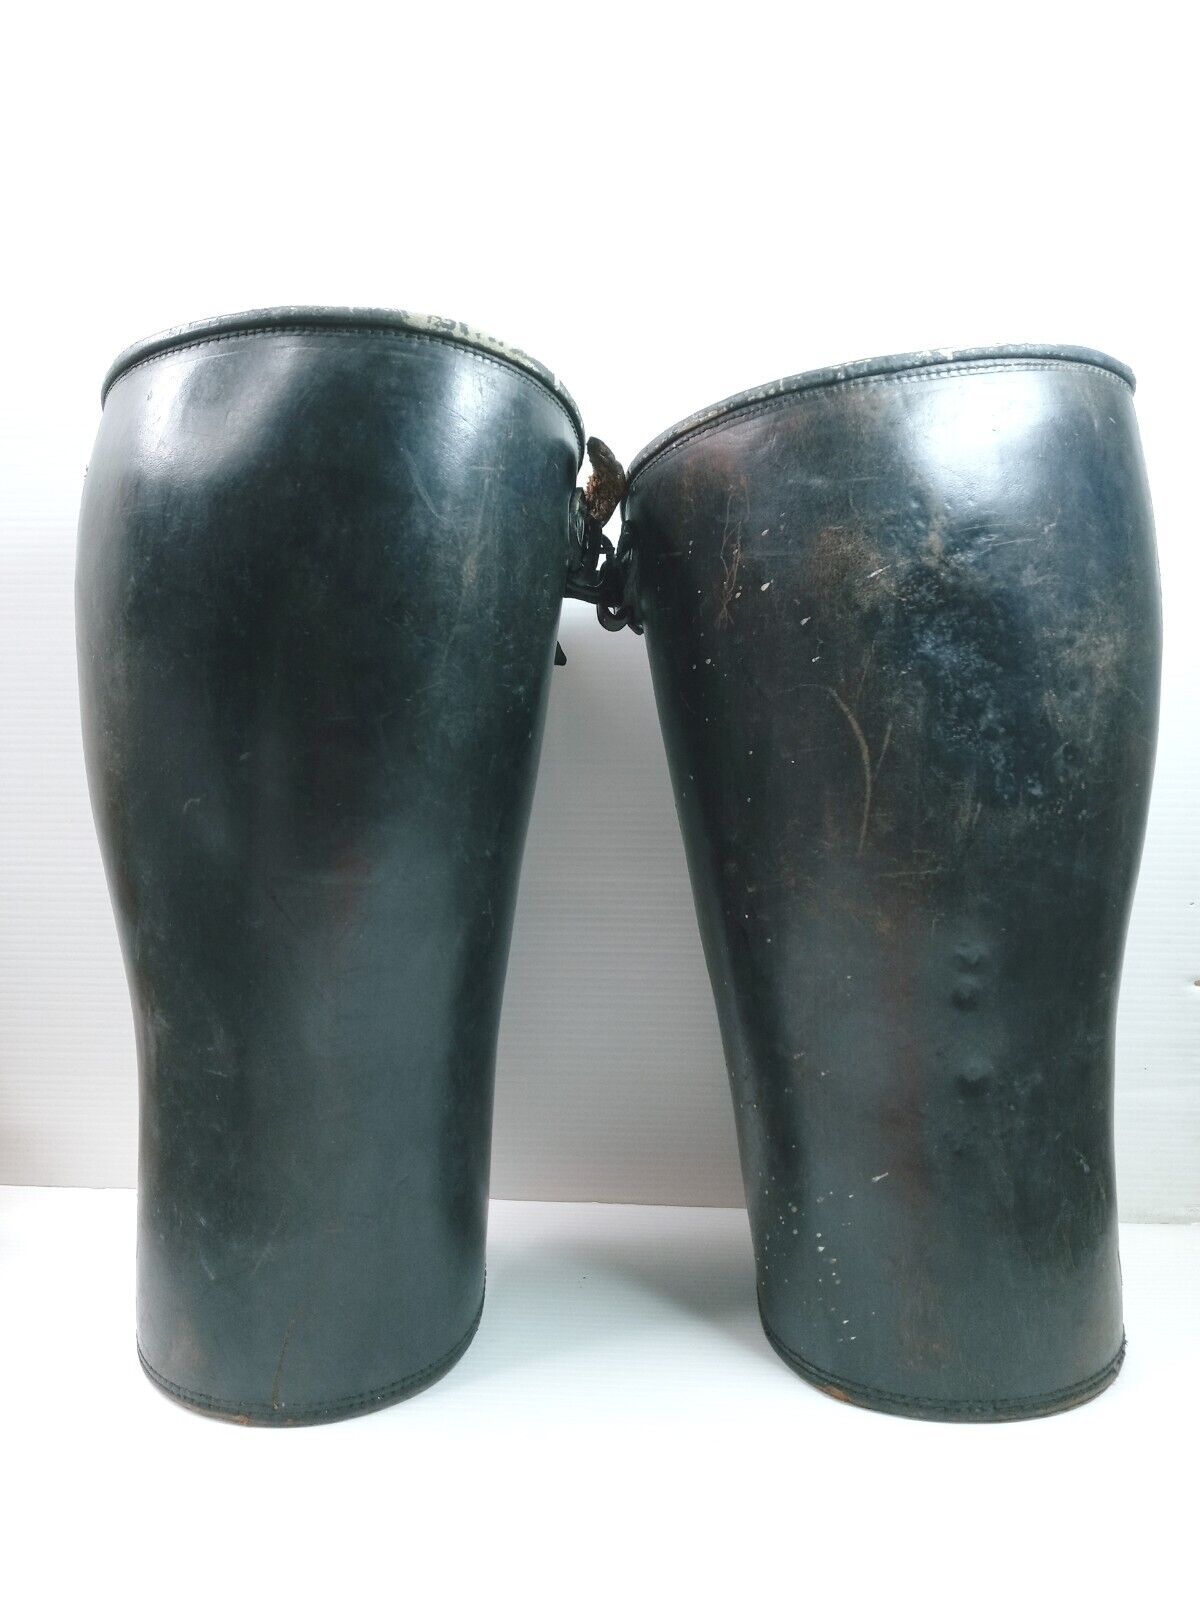 WW1 Leather Gaiters / Leather Riding Spats